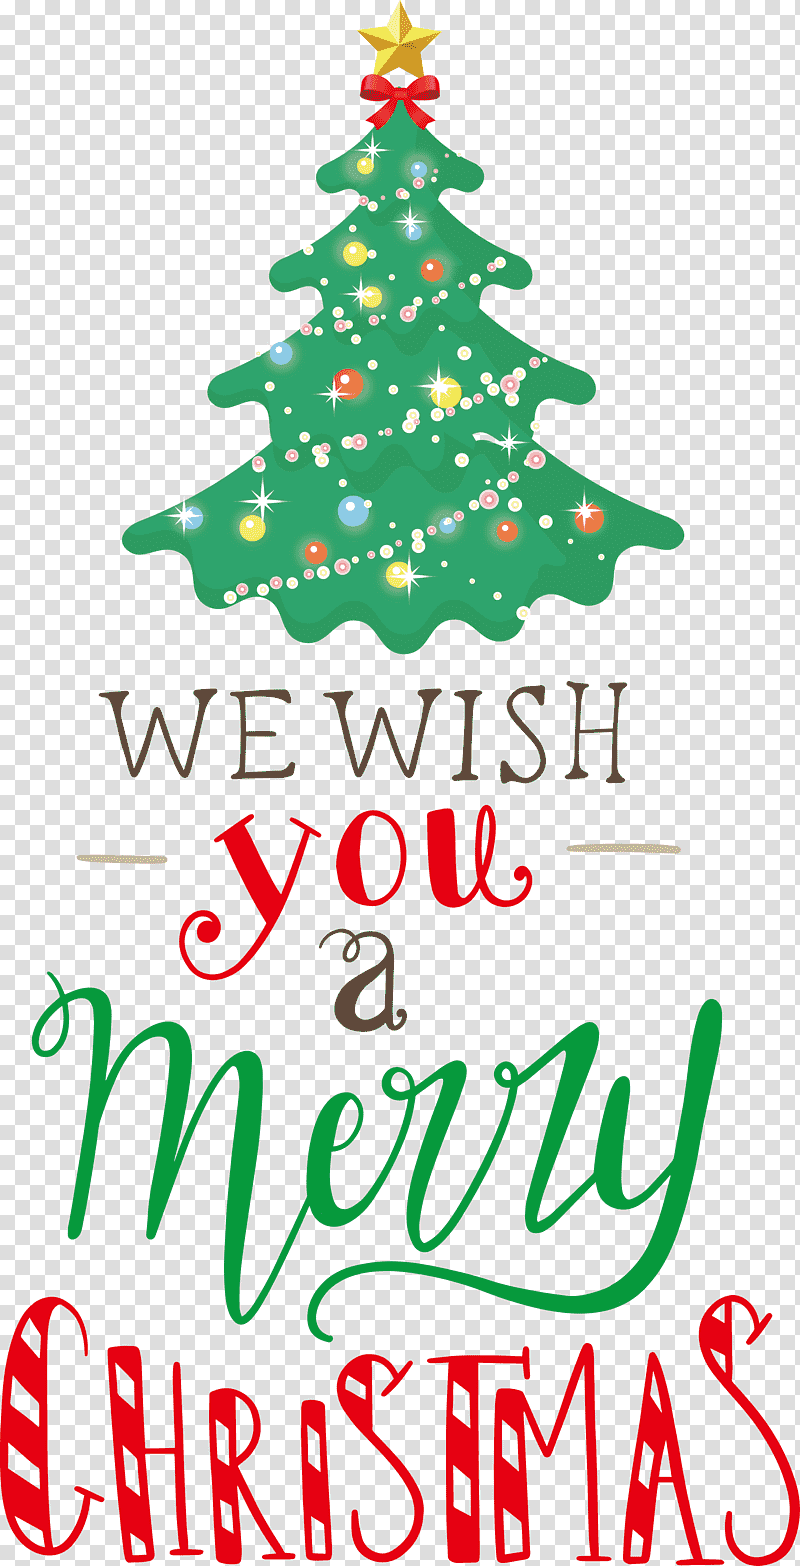 Merry Christmas We Wish You A Merry Christmas, Christmas Tree, Christmas Day, Fir, Holiday Ornament, Christmas Ornament, Spruce transparent background PNG clipart